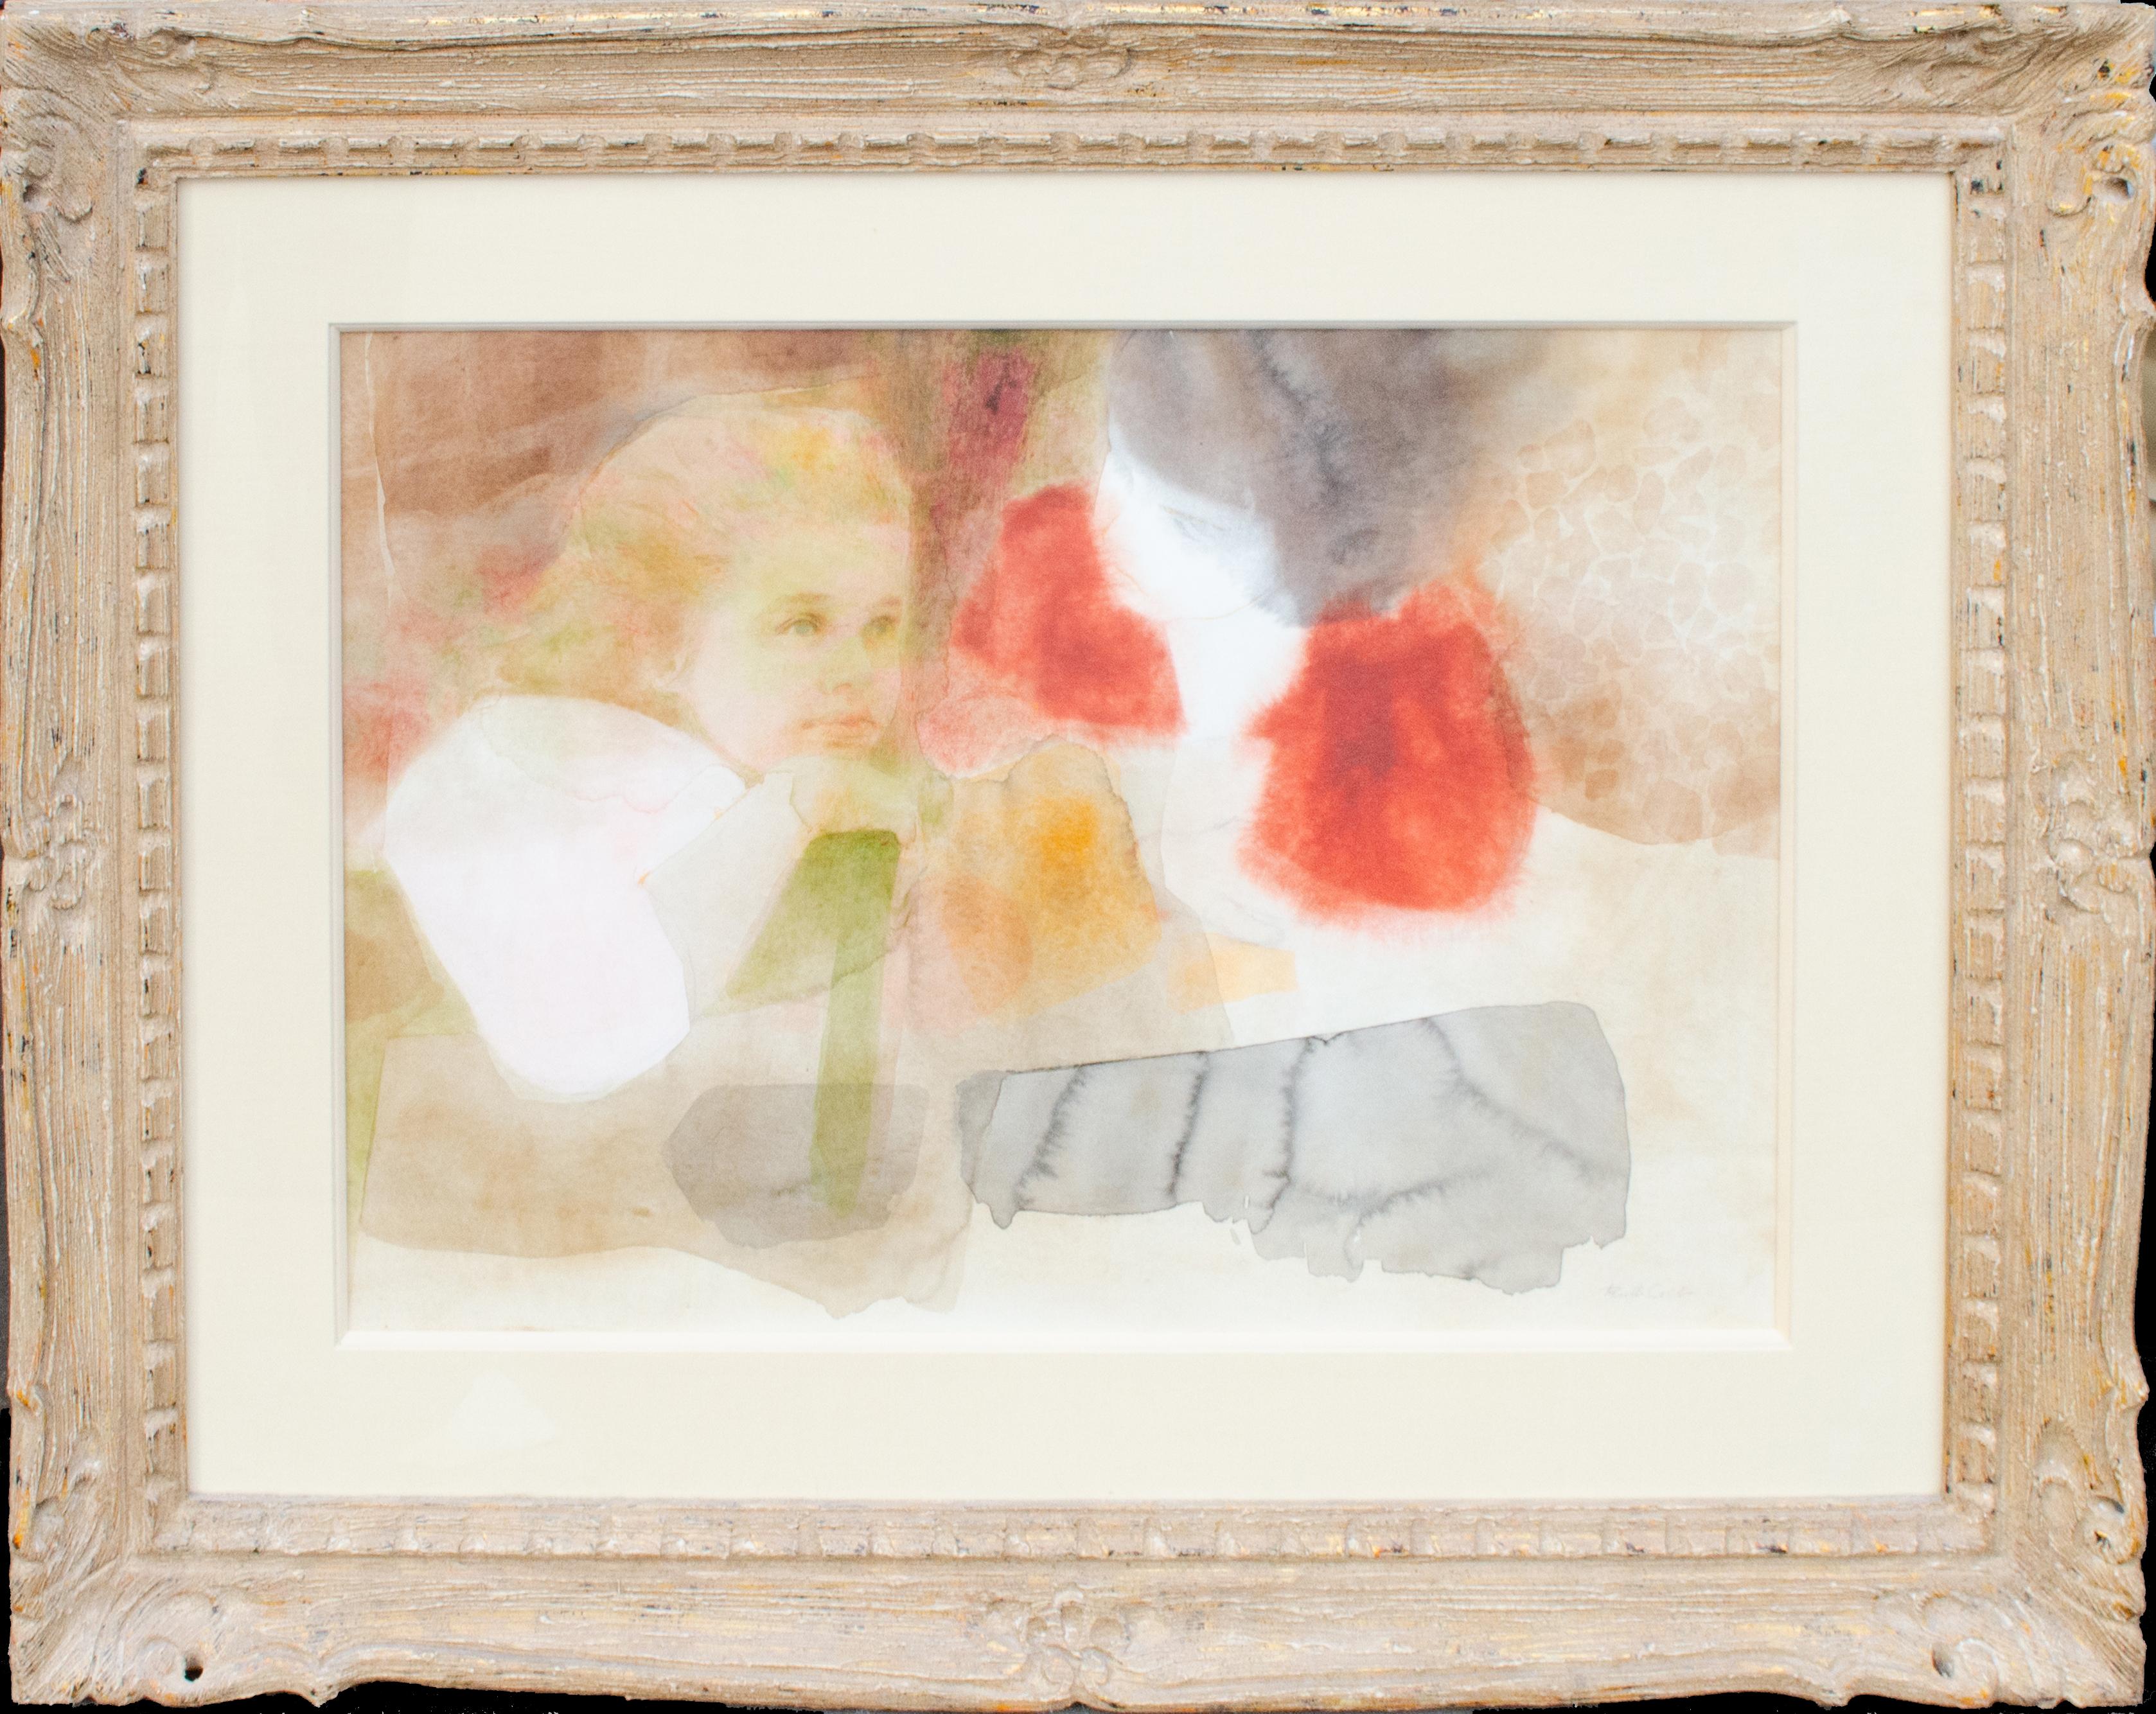 Ruth Cobb (American, 1914-2008)
Untitled, c. 20th century
Watercolor and mixed media on paper
Sight: 19 3/4 x 28 1/2 in.
Framed: 33 1/2 x 41 3/4 x 1 3/4 in.
Signed lower right

Born in Boston, Massachusetts and a resident of Newton, Ruth Cobb was